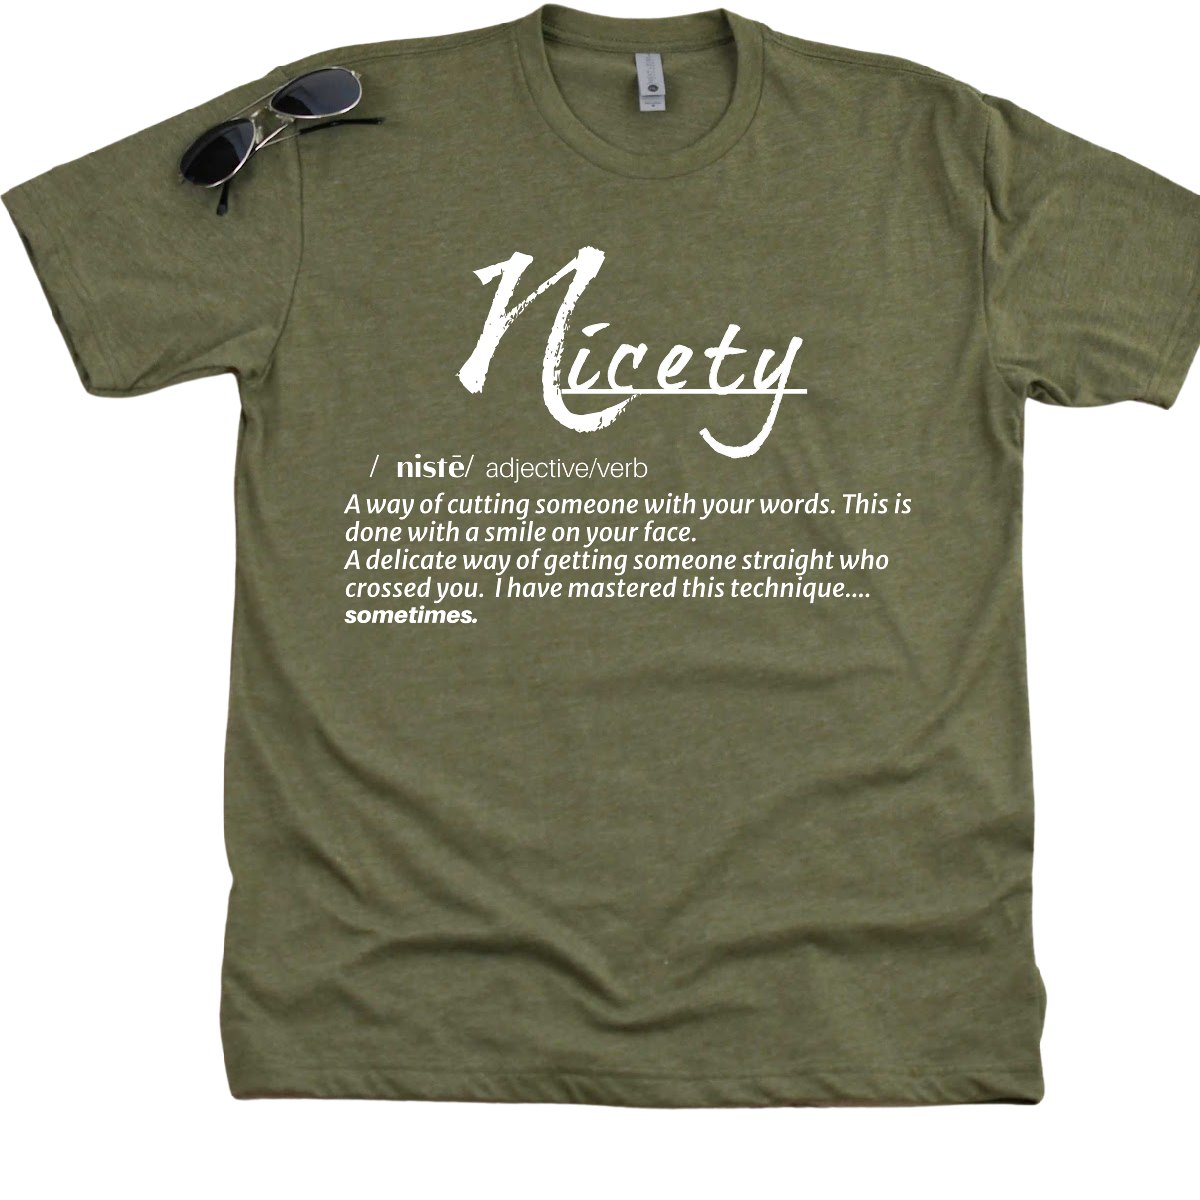 Nicety Definition T-Shirt White Lettering